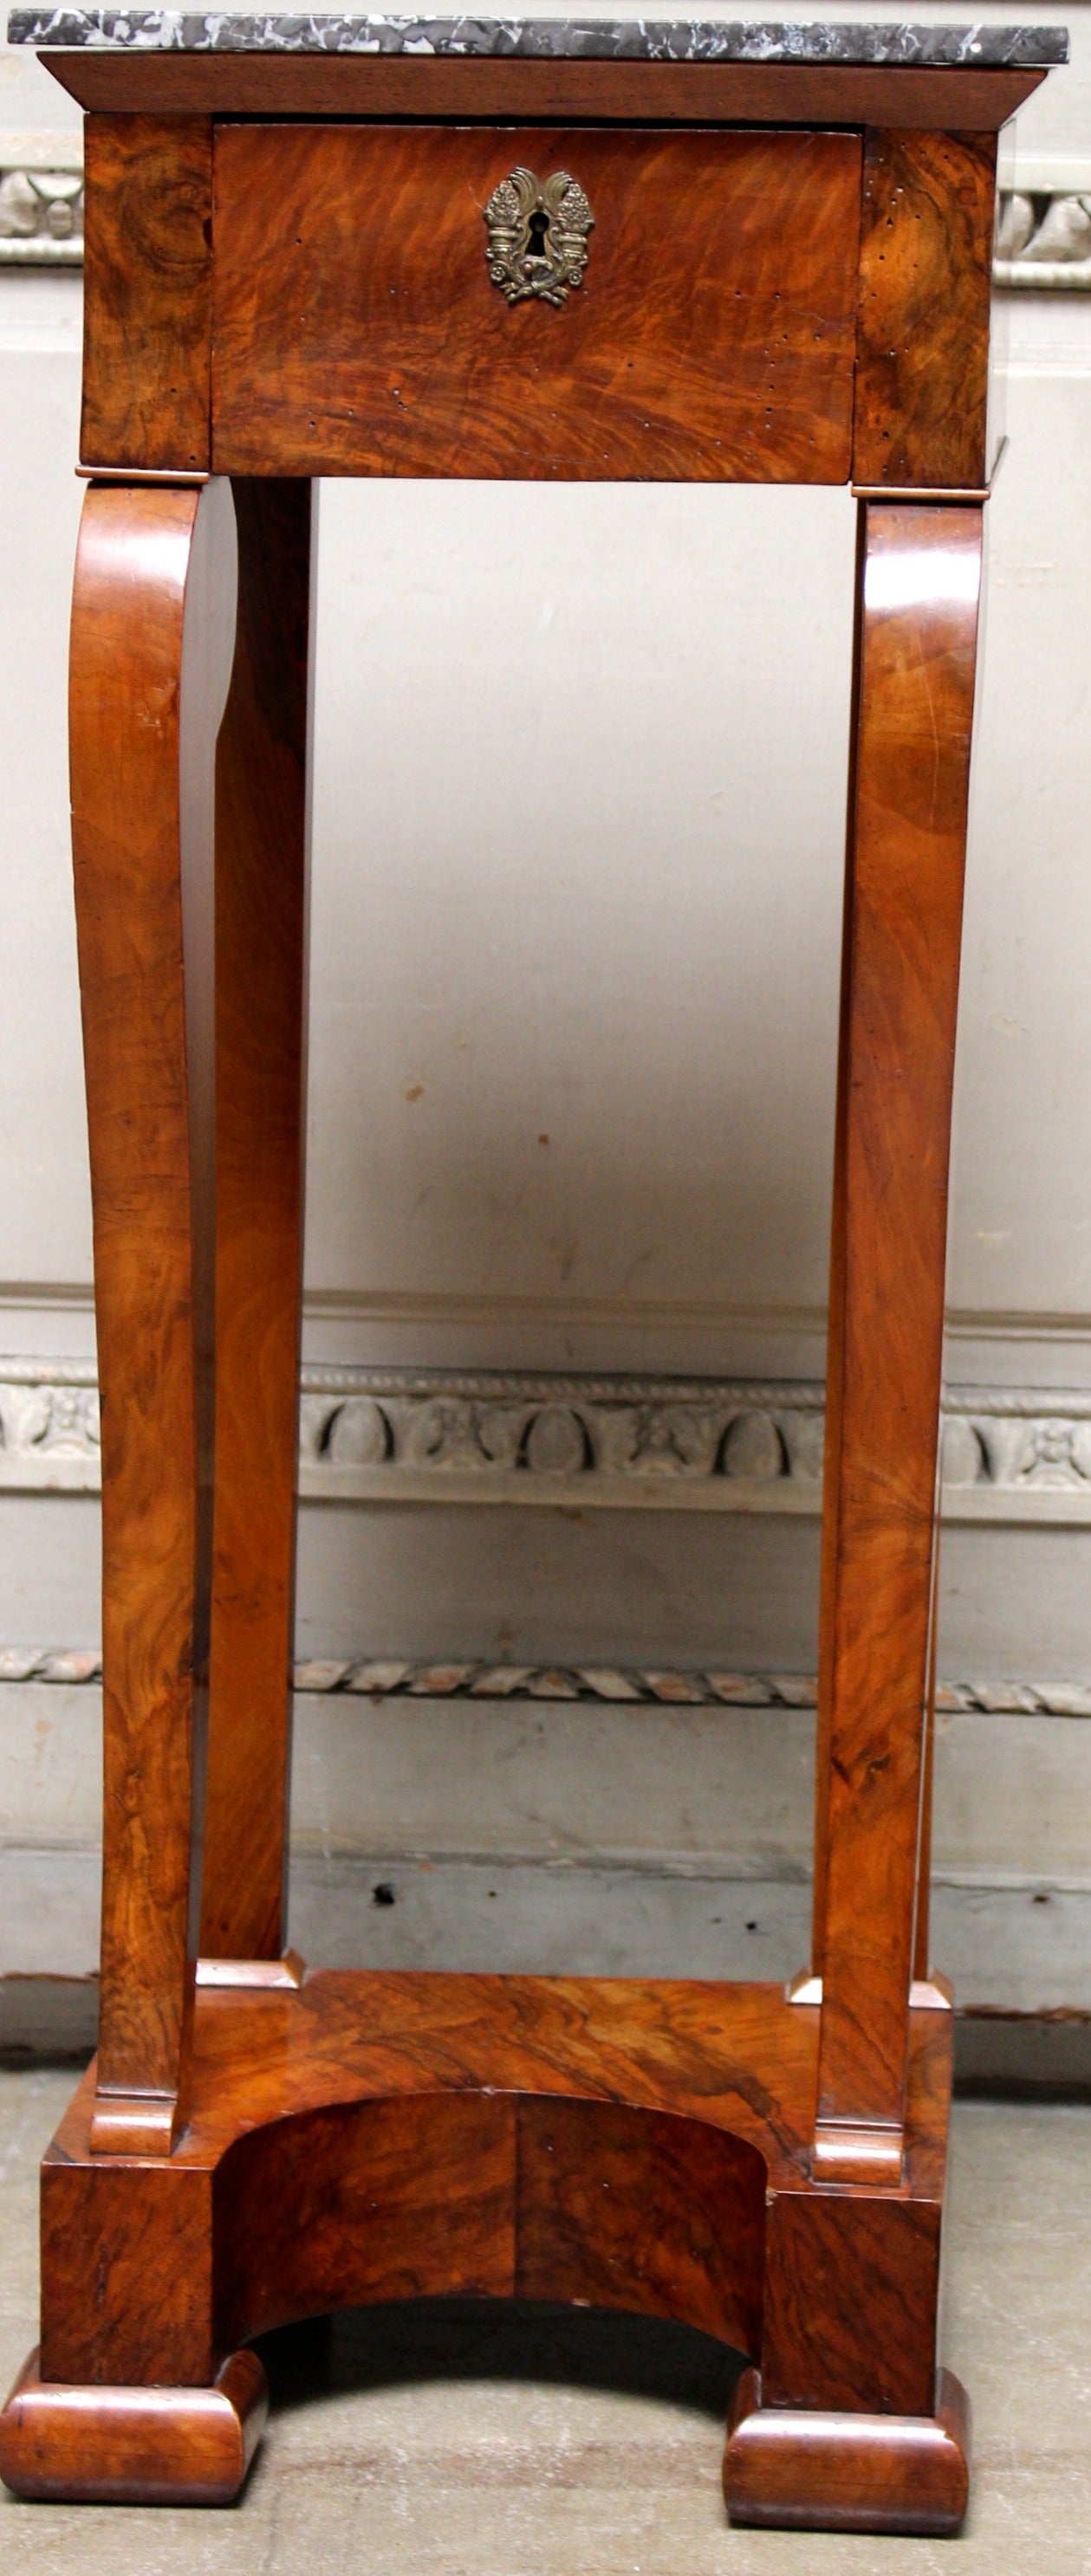 A French Charles X mahogany table, candle stand with a marble top.